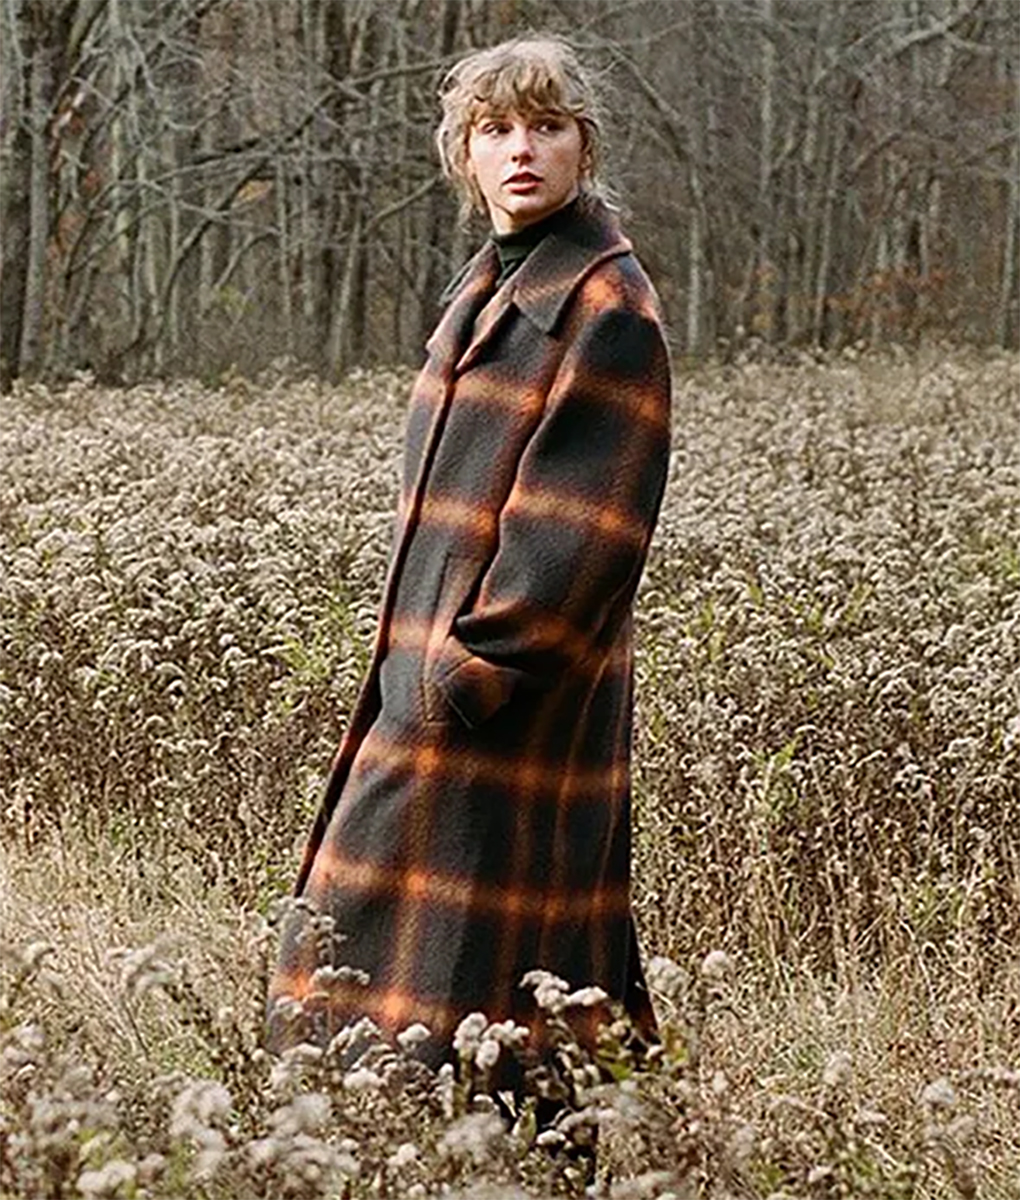 Evenmore, Taylor Swift’s Checkered Coat